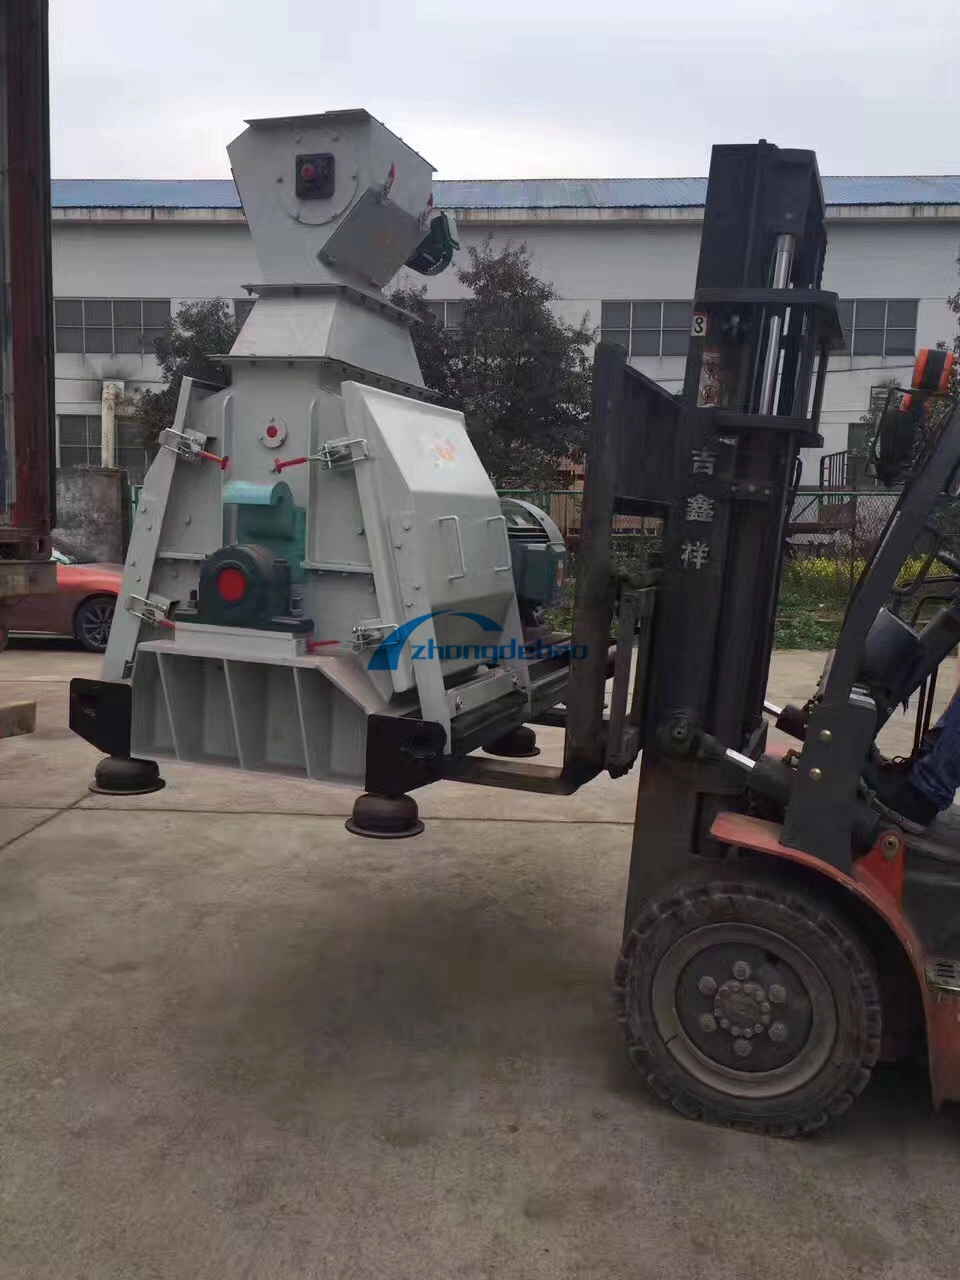 New Design Combined Type of Sawdust Hammer Mill with Feed Pellet Making Machine Wood Crusher Pelletizer for Fuel Farm Cattle Pig Chicken Feed Pellet Machine